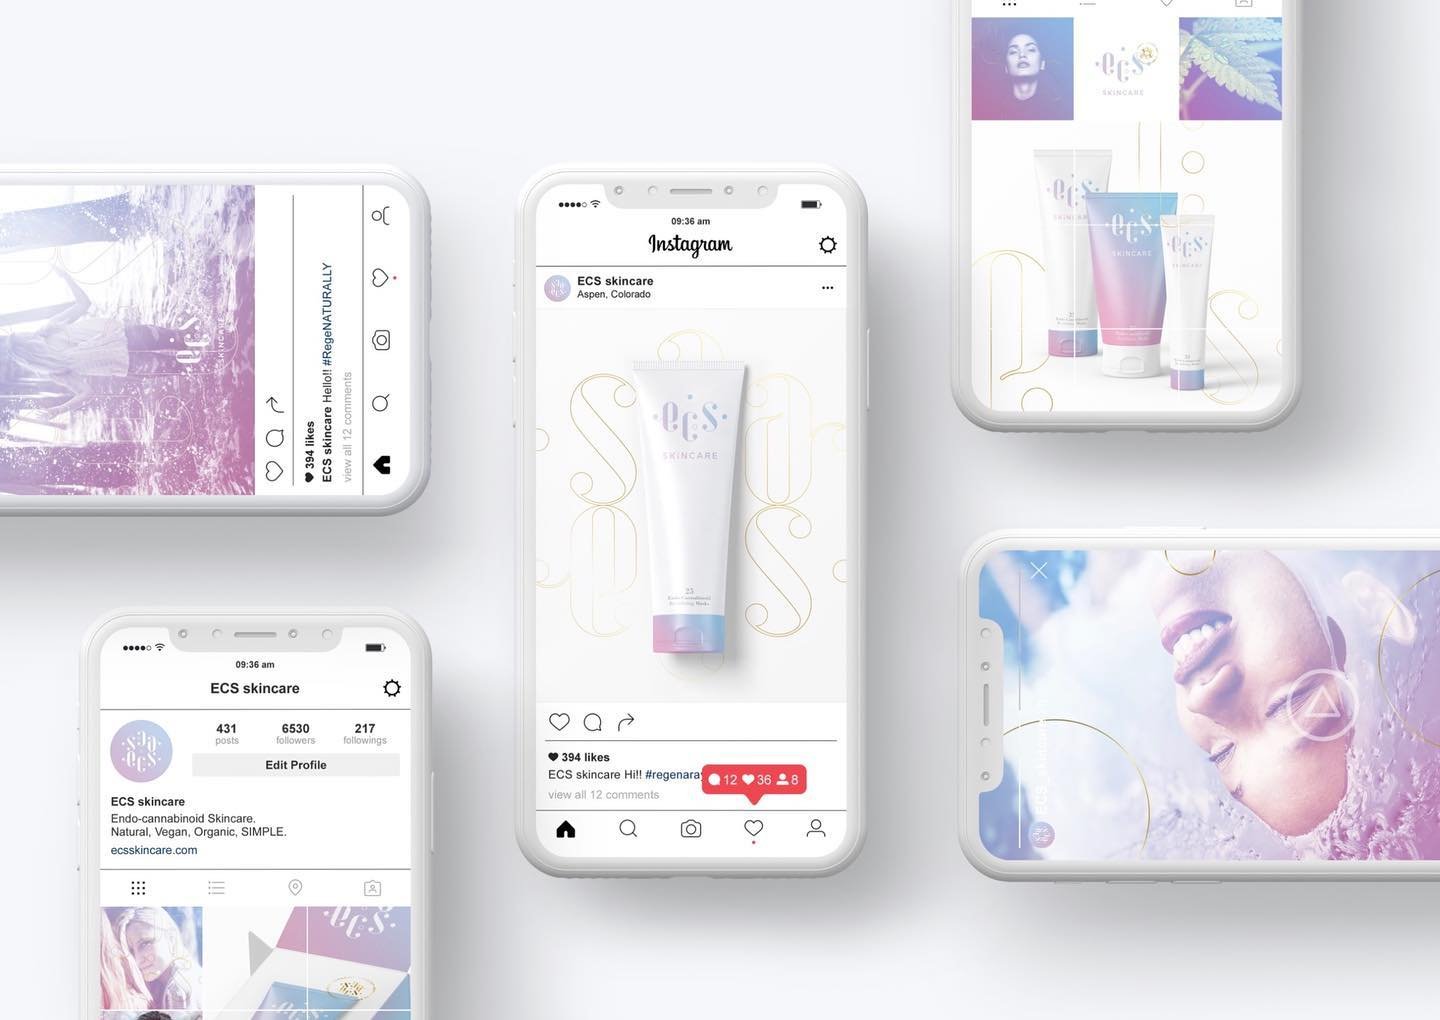 More from concept 2 in our brand prez for ECS Skincare. We always include social media mockups for each concept - so u know exactly how we plan on making you stand out in the feed! 🤩 #wedoitall #branding #marketingstrategy #cottoncandygradient #gold